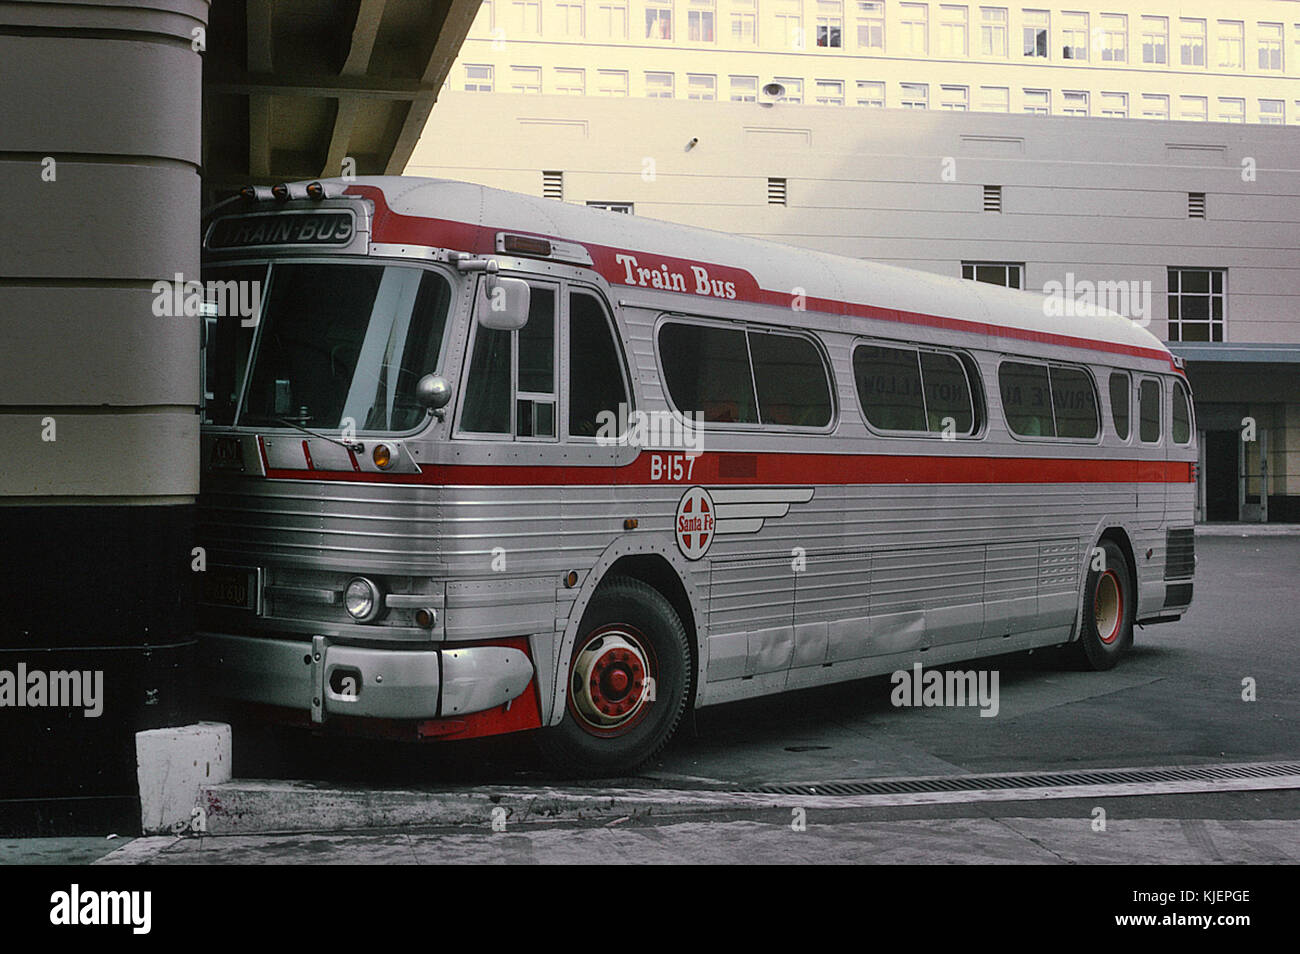 Western Pacific using AT&SF Train Bus to Oakland for California Zephyr bus  B 157 at Santa Fe Bus Depot, San Francisco, CA on August 26, 1967  (22386689461 Stock Photo - Alamy